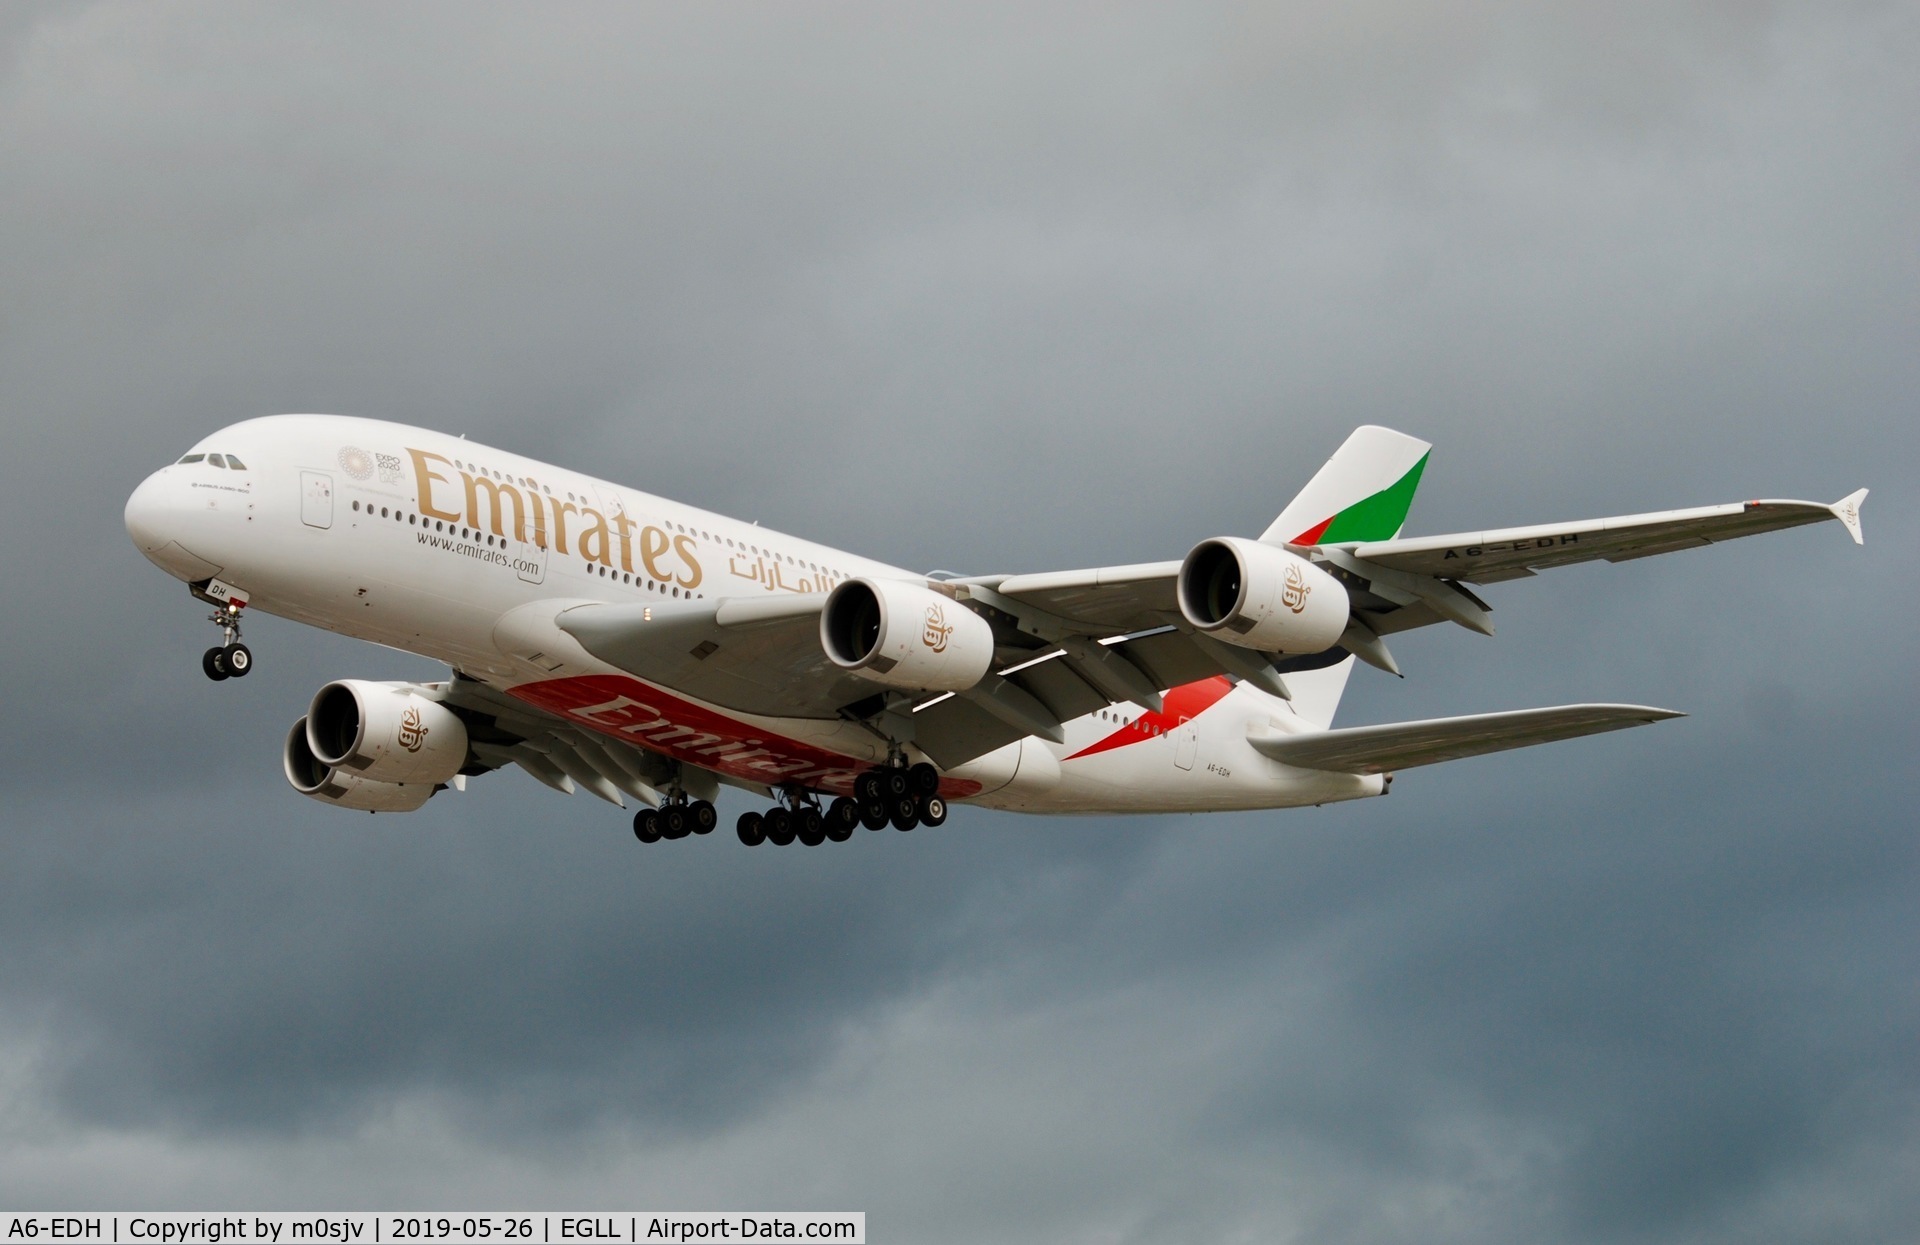 A6-EDH, 2009 Airbus A380-861 C/N 025, Taken from various locations around the 27L/R landing zones